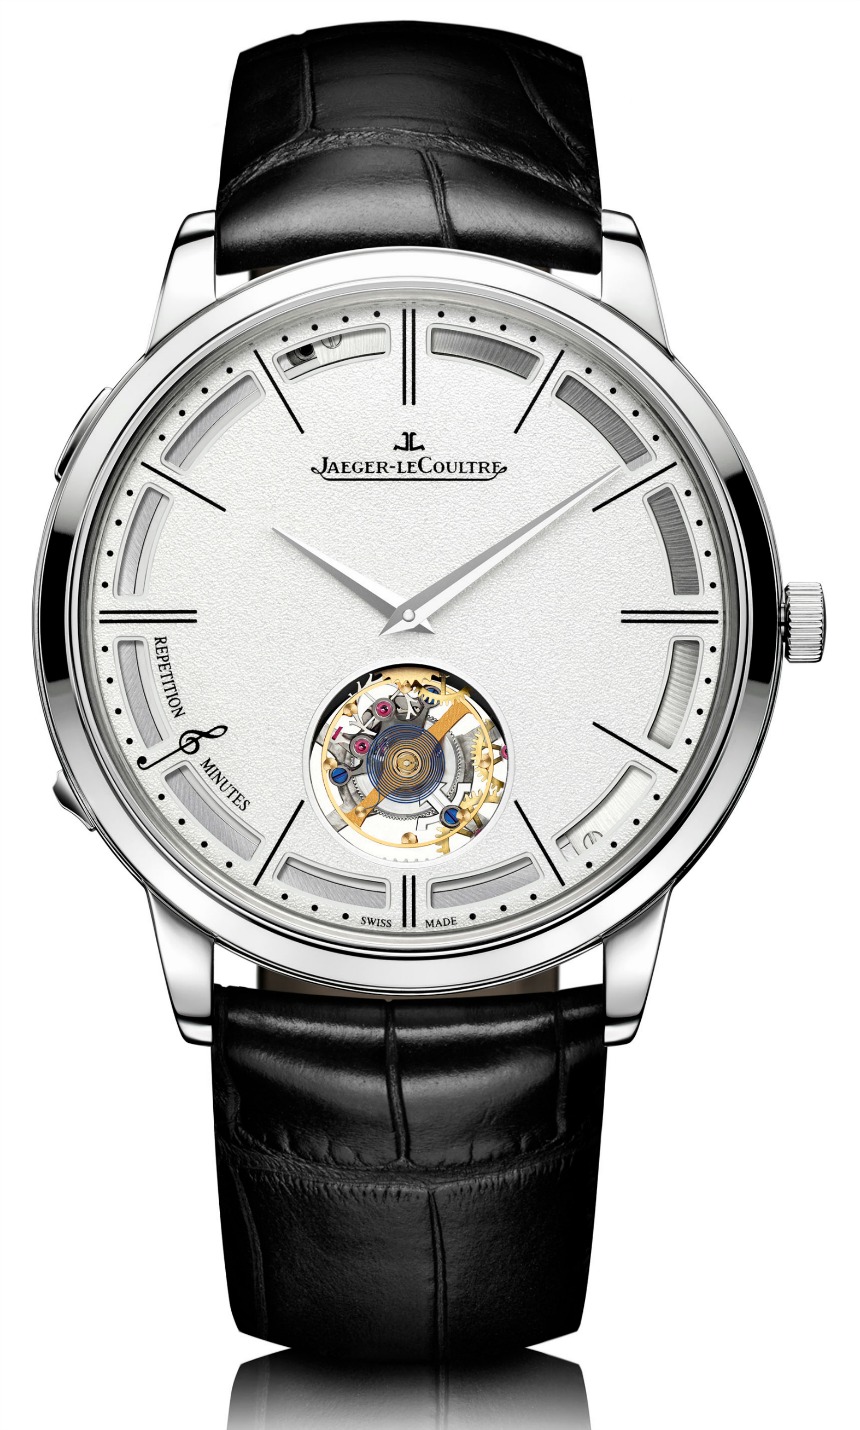 Jaeger-LeCoultre-Master-Ultra-Thin-Minute-Repeater-Flying-Tourbillon-watch-2